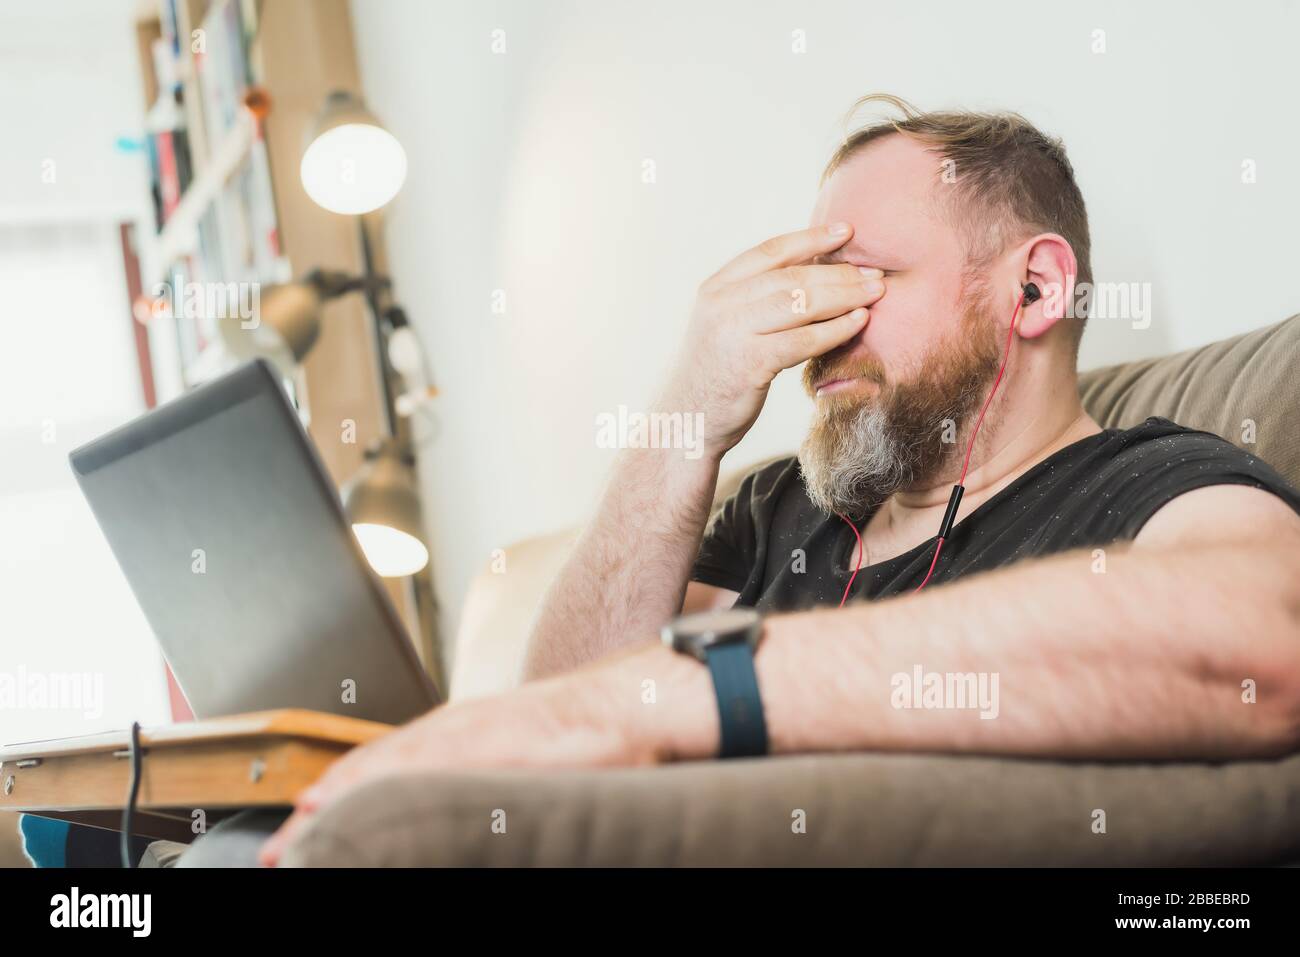 Work from home because pandemic. Remote office. IT specialist conduct online meetings Stock Photo